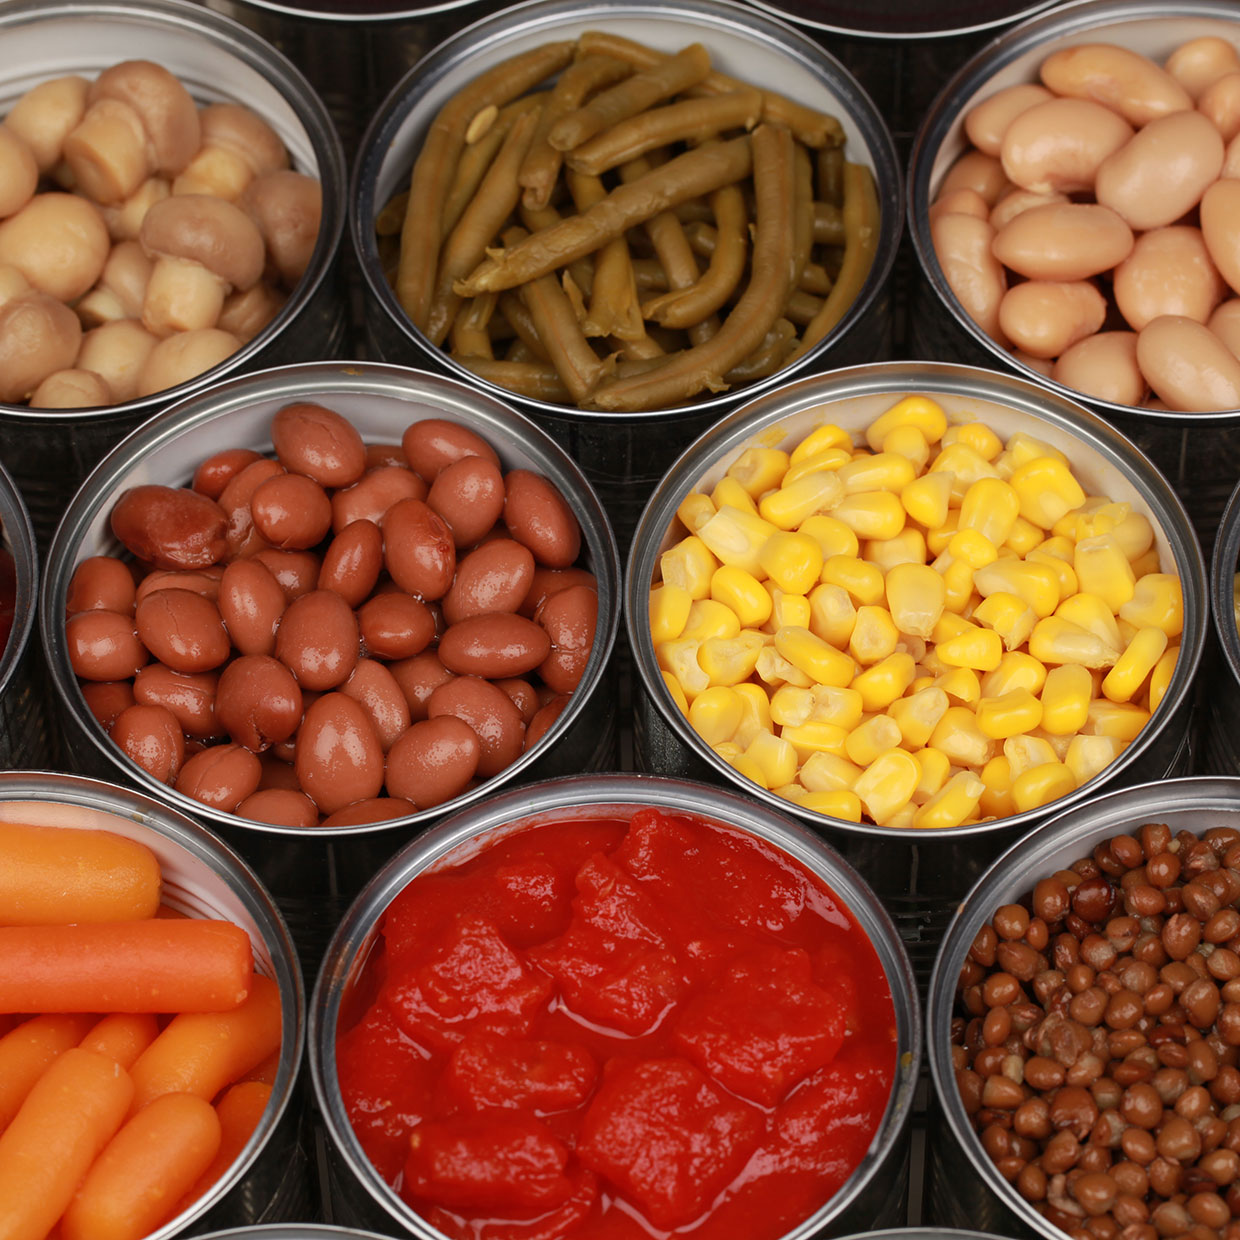 a group of opened cans of food containing fruits vegetables and legumes